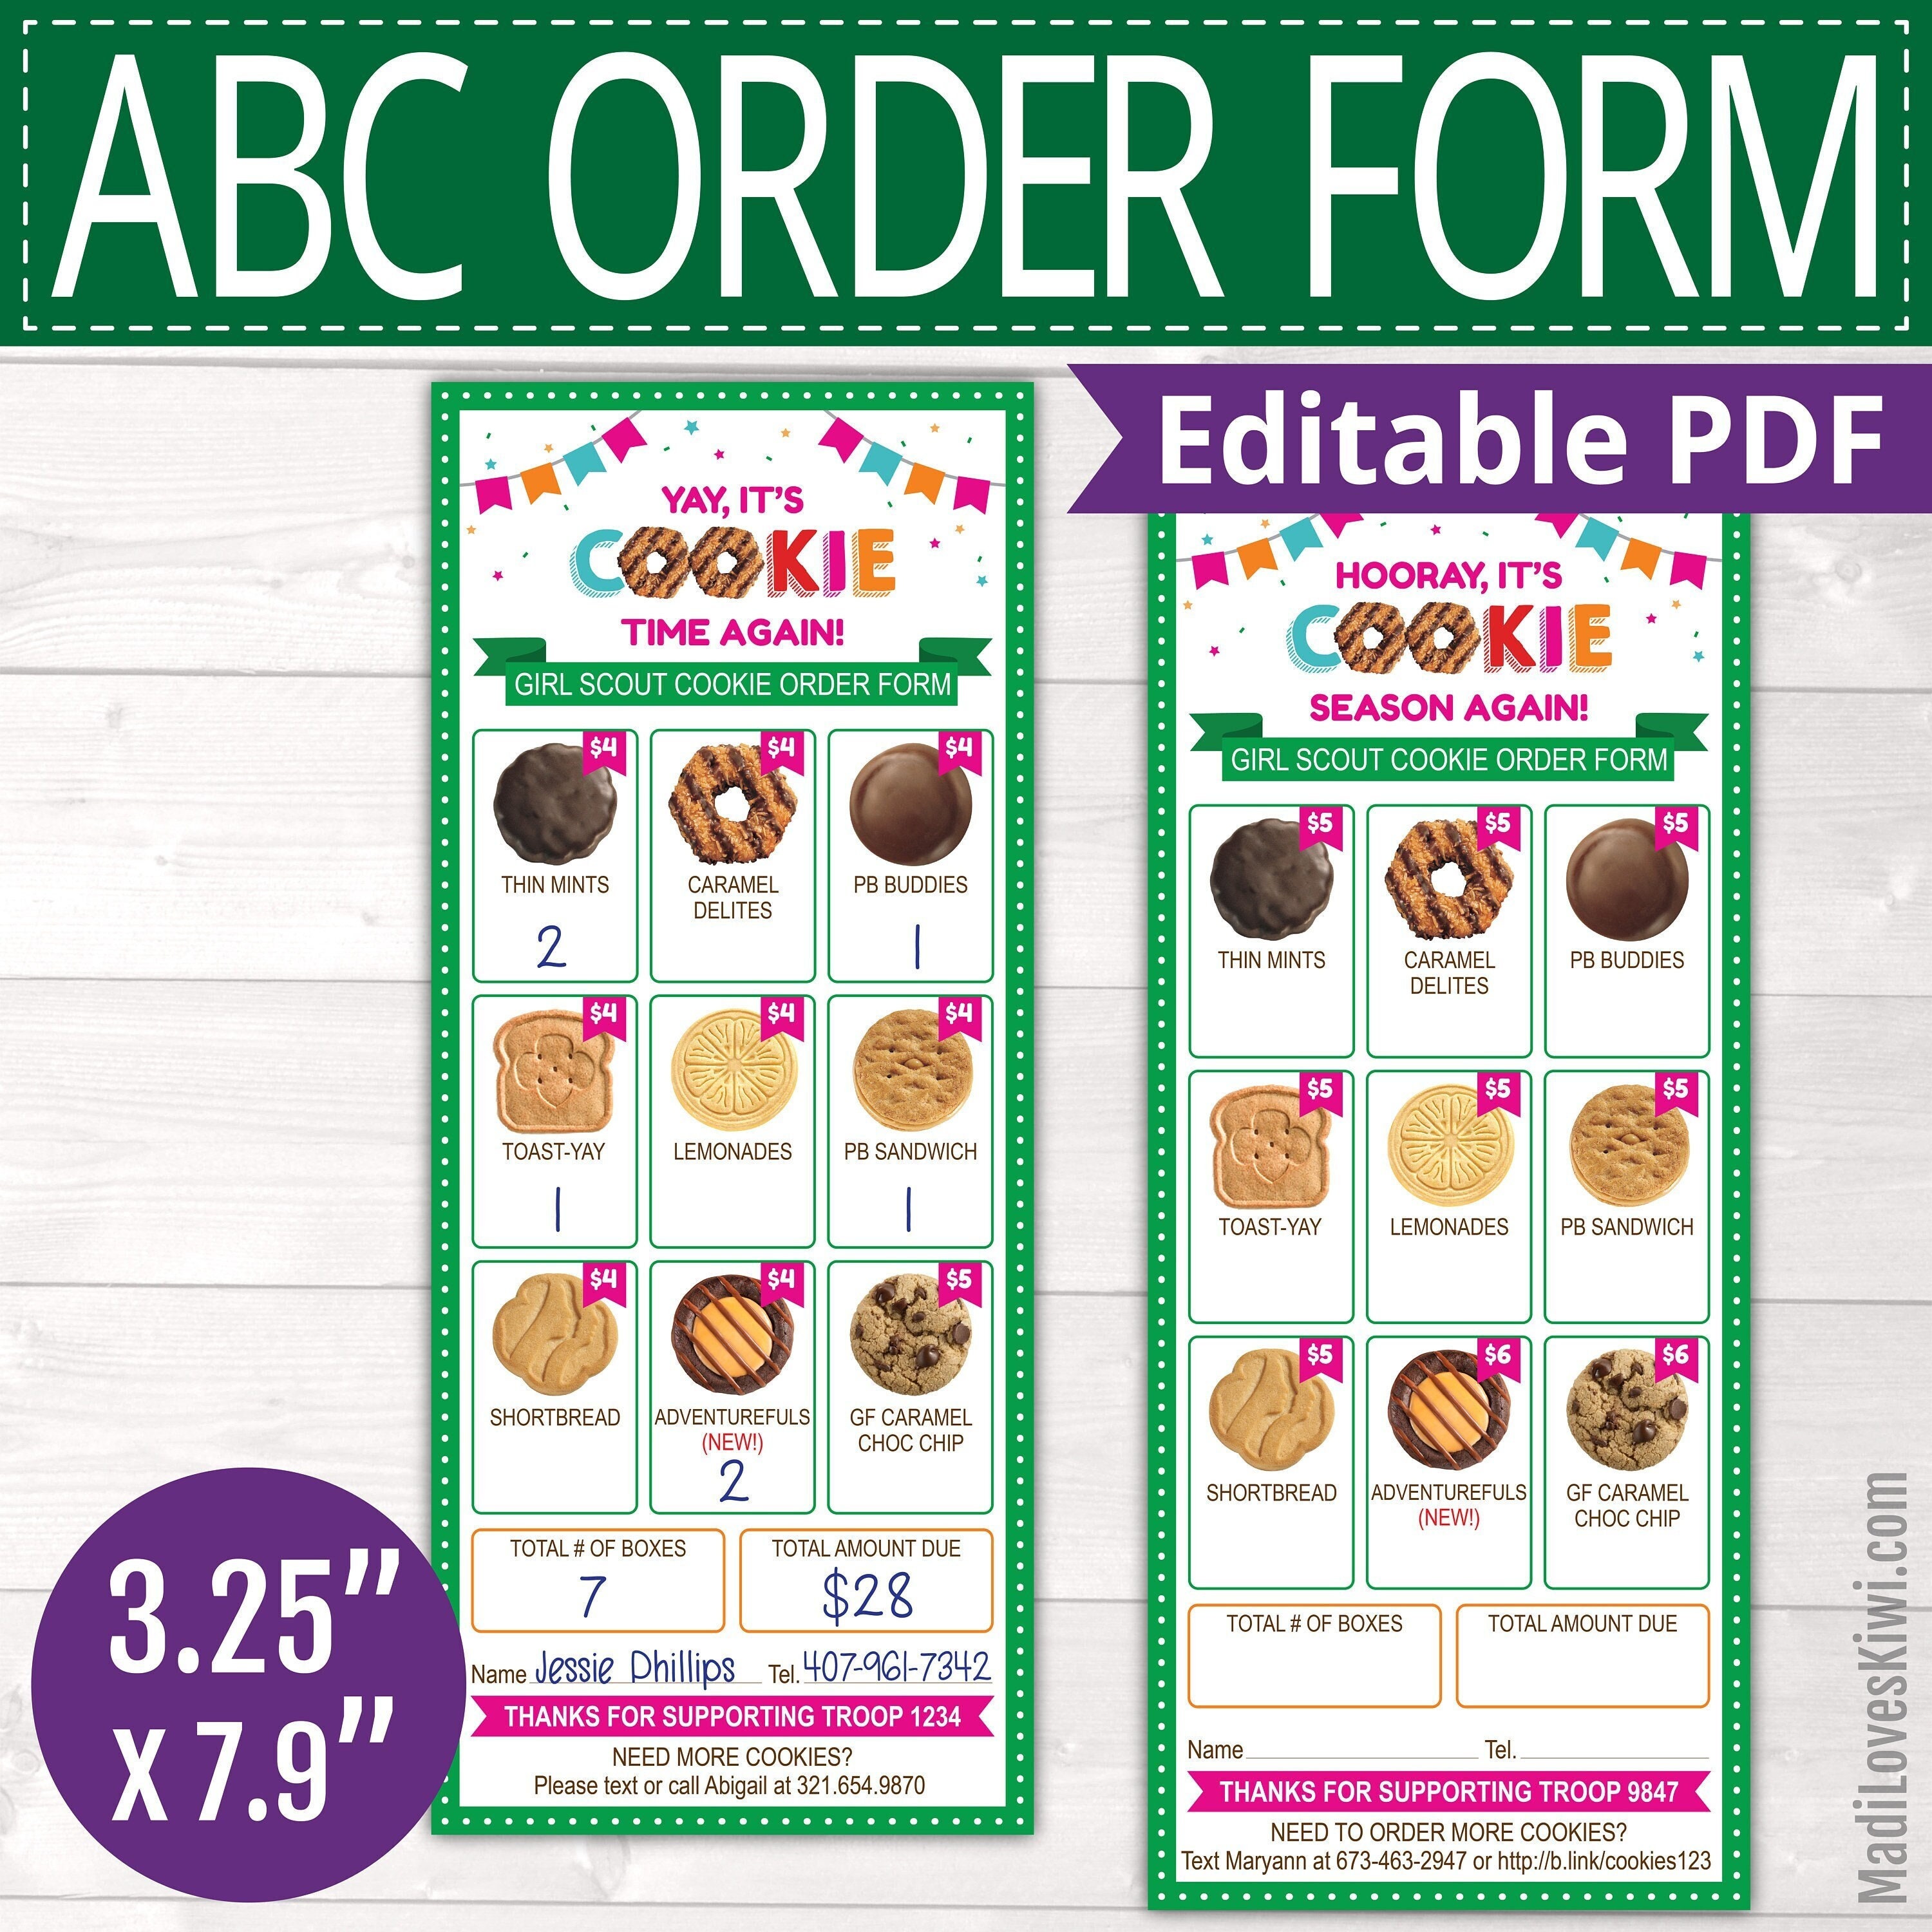 2022-abc-girl-scout-cookie-order-form-printable-personalized-etsy-ireland